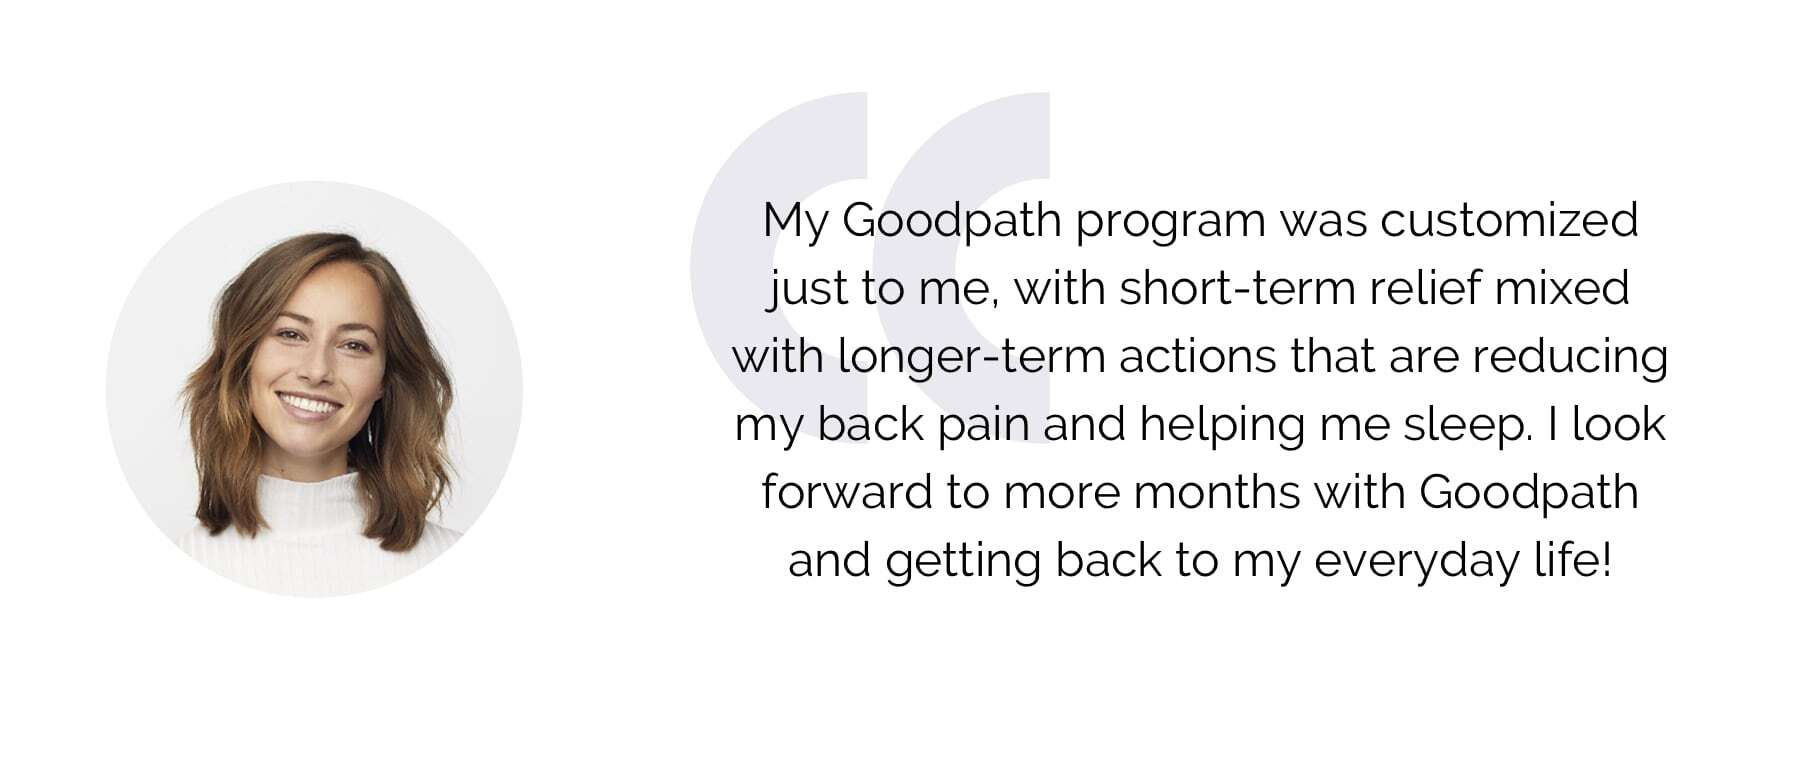 A testimonial showcasing the great personalized Goodpath programs.